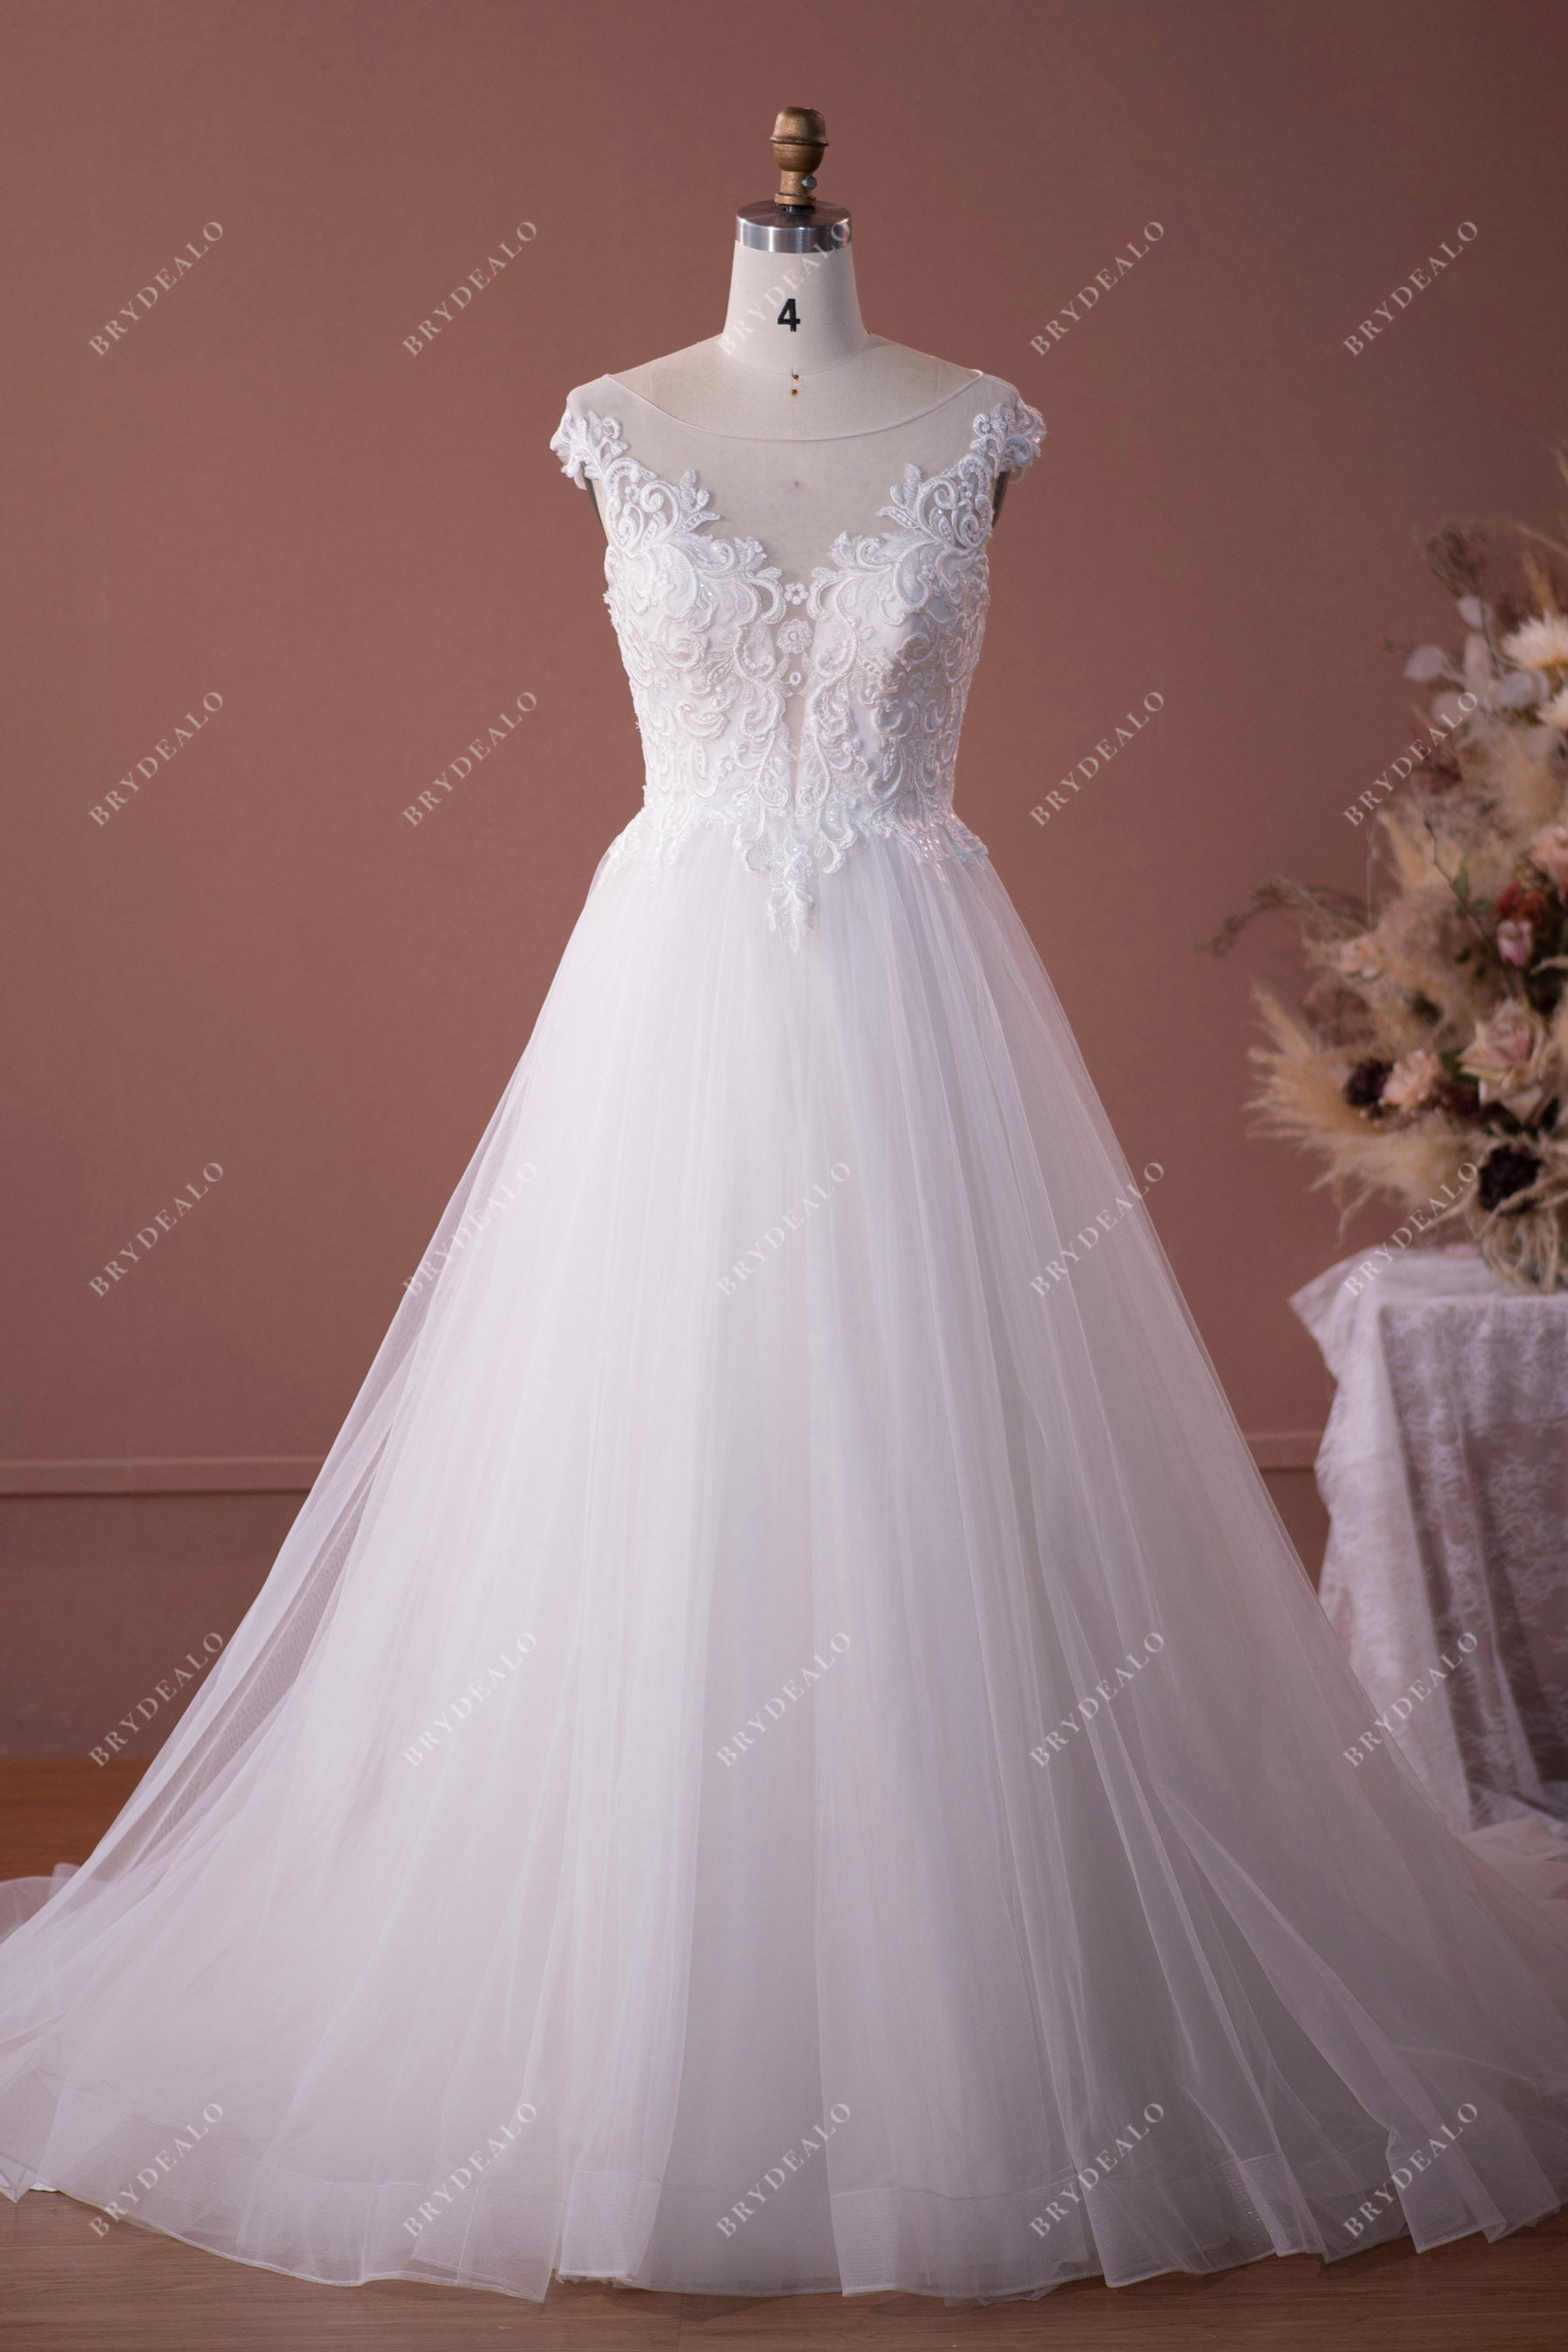 Illusion Neck Cap Sleeve Lace Tulle A-line Wedding Dress